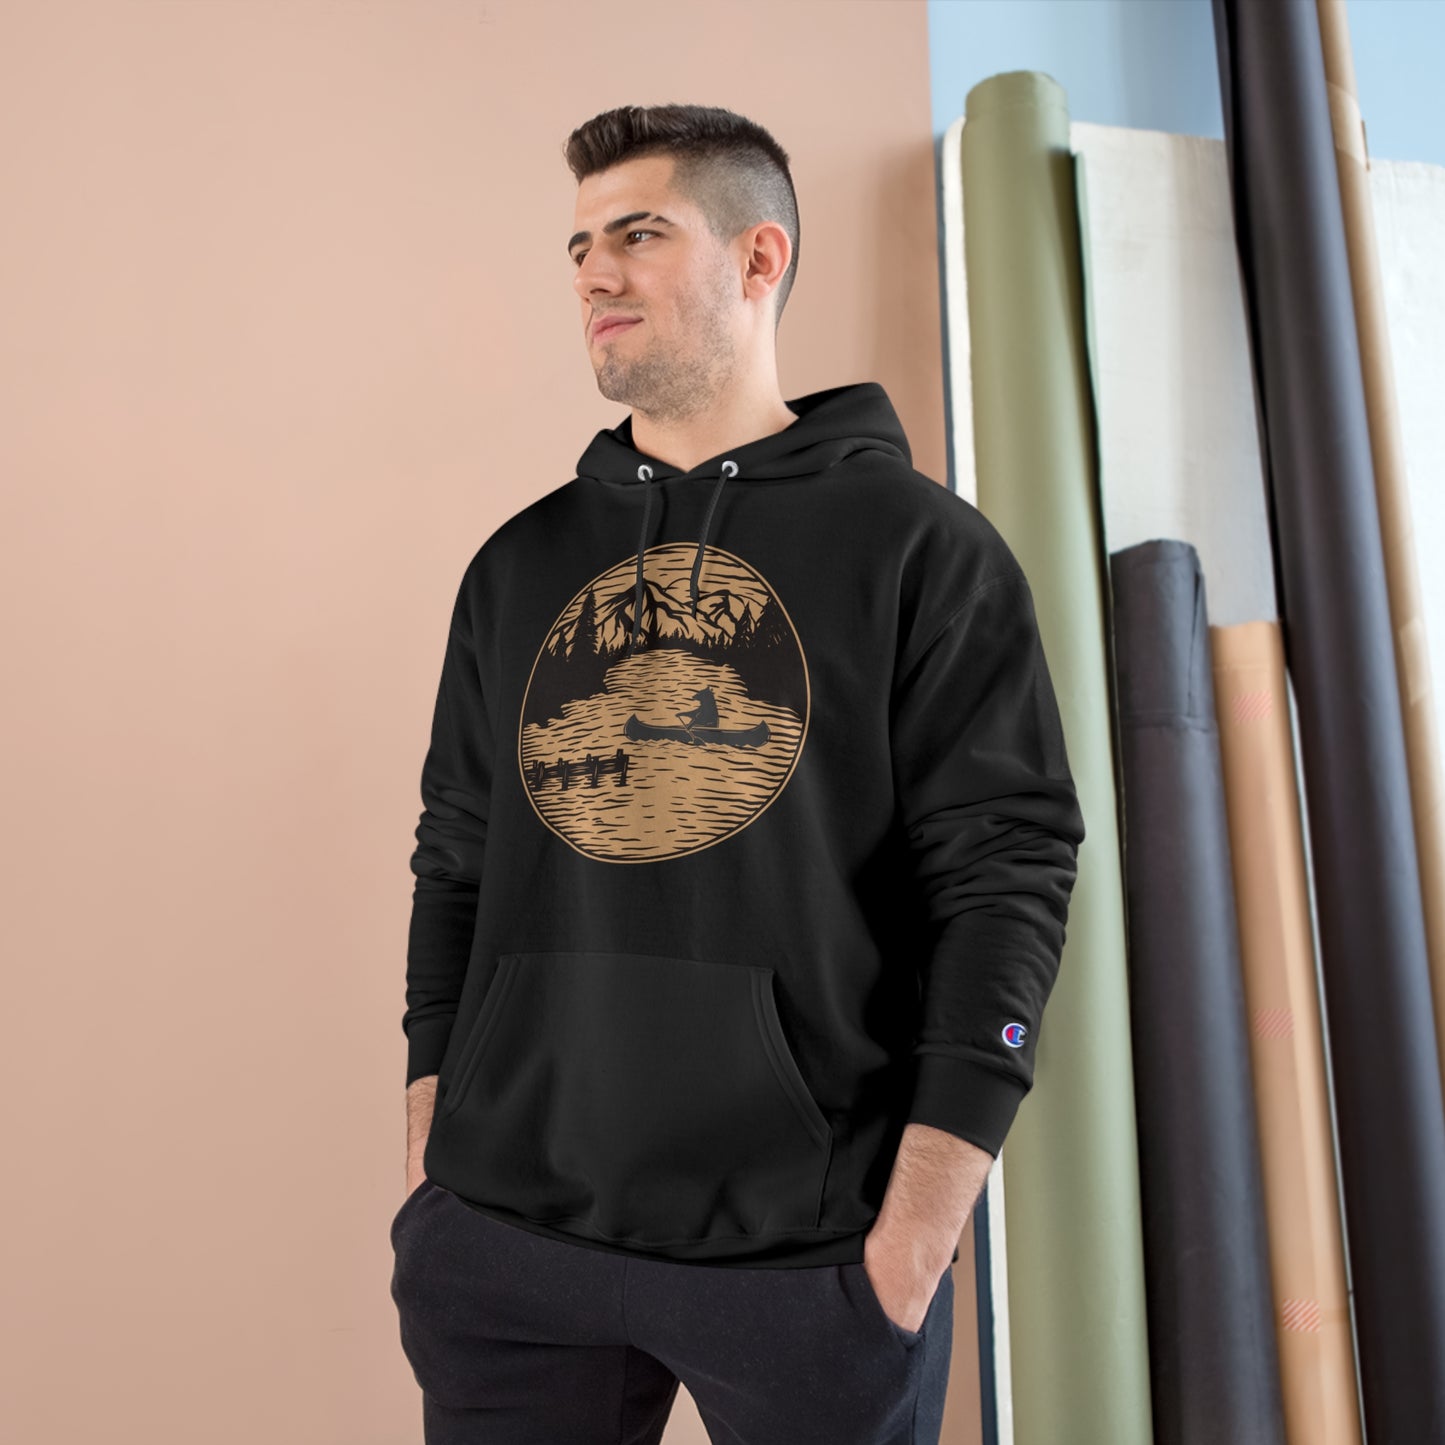 A bear taking a night time canoeing trip on the lake on this very comfortable Champion Hoodie.